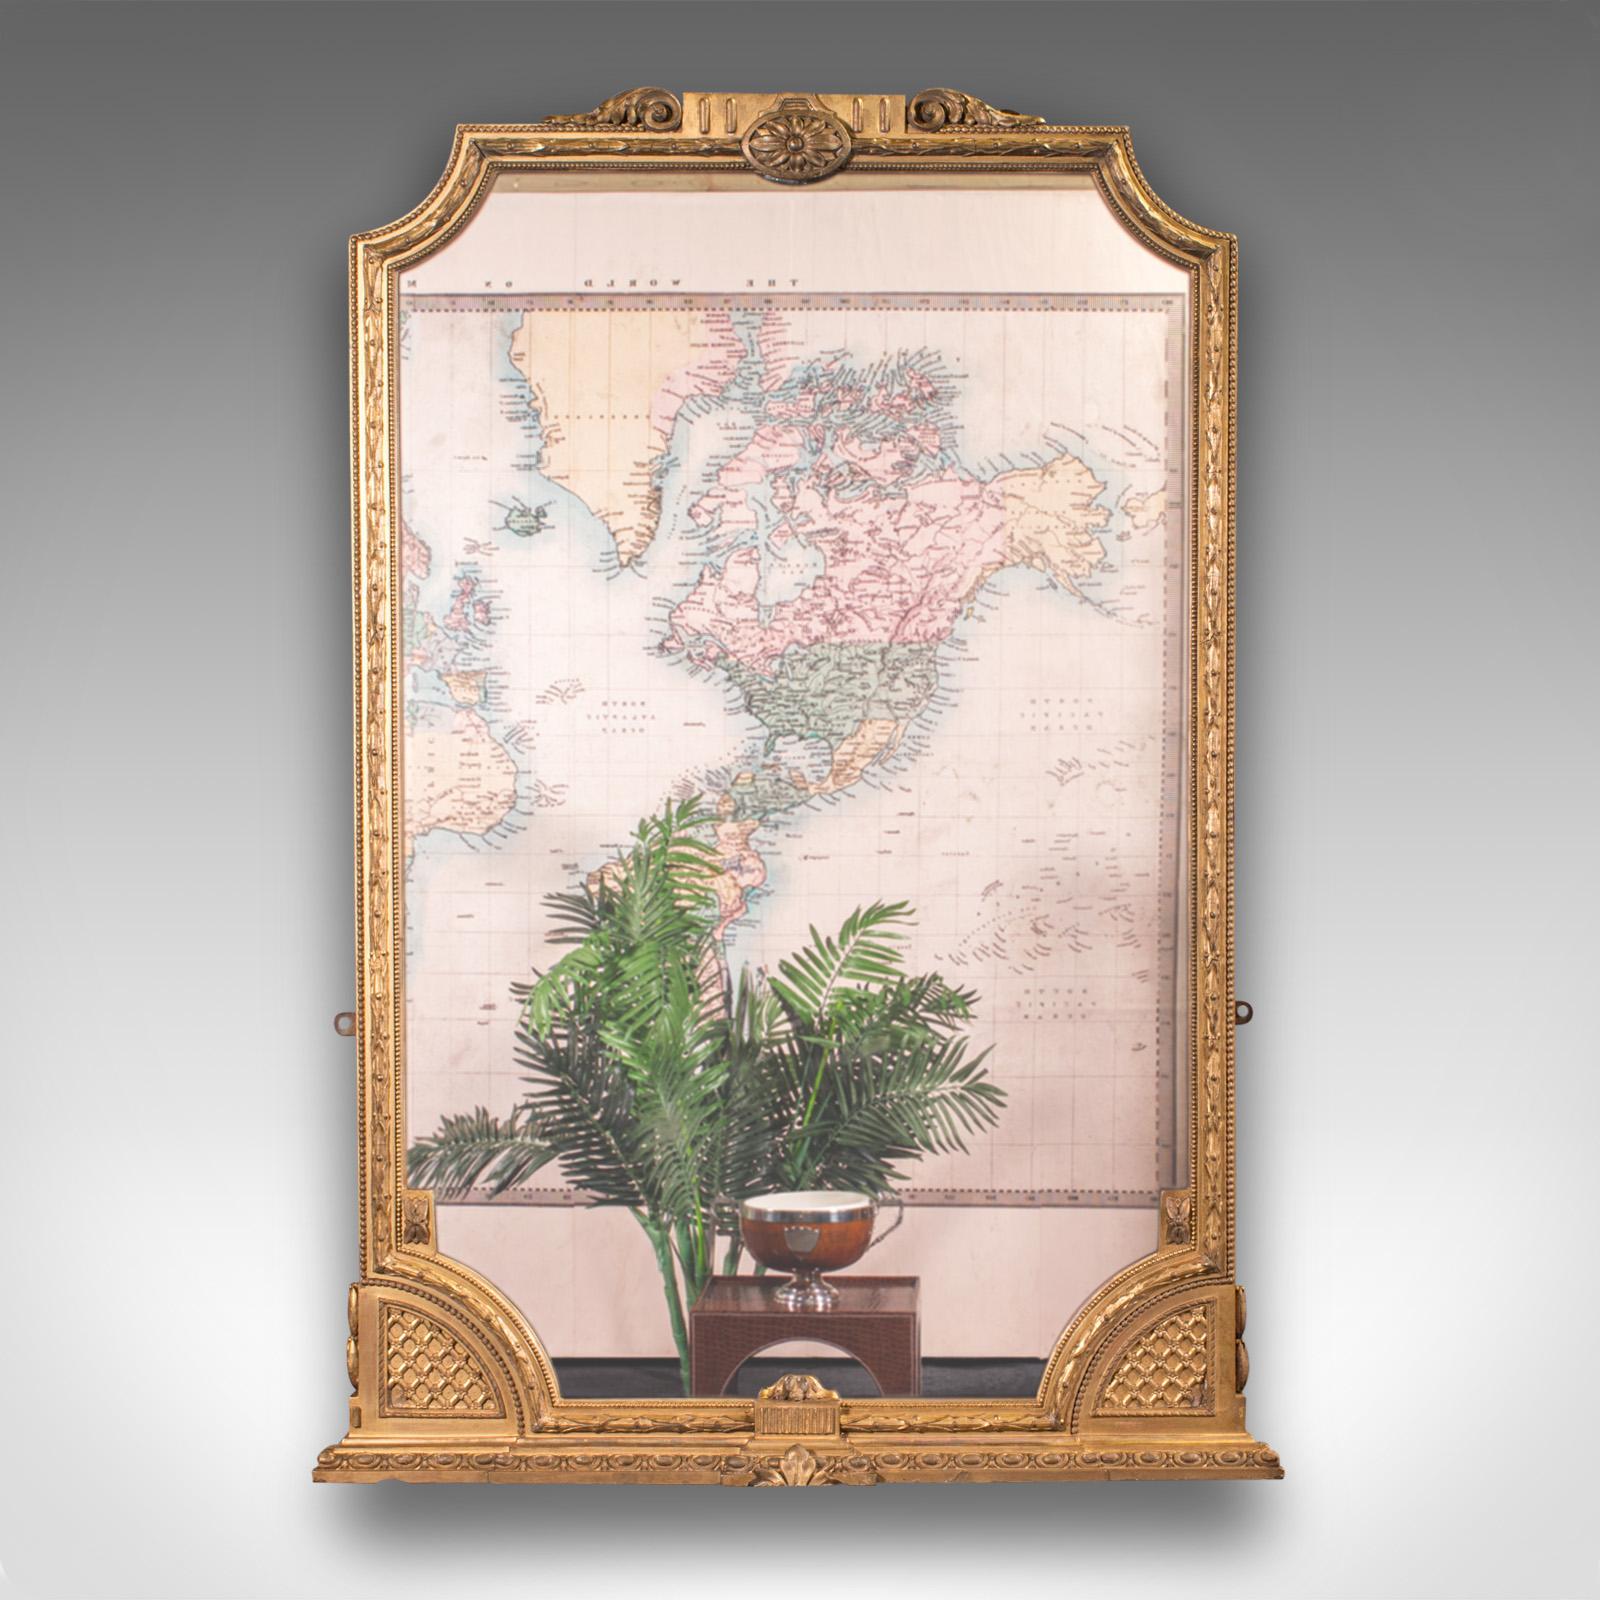 This is a grand antique overmantle mirror. An English, giltwood wall mirror in Italianate taste, dating to the early Victorian period, circa 1850.

Enhance your chimney breast wall with this generous mirror
Displays a desirable aged patina and in